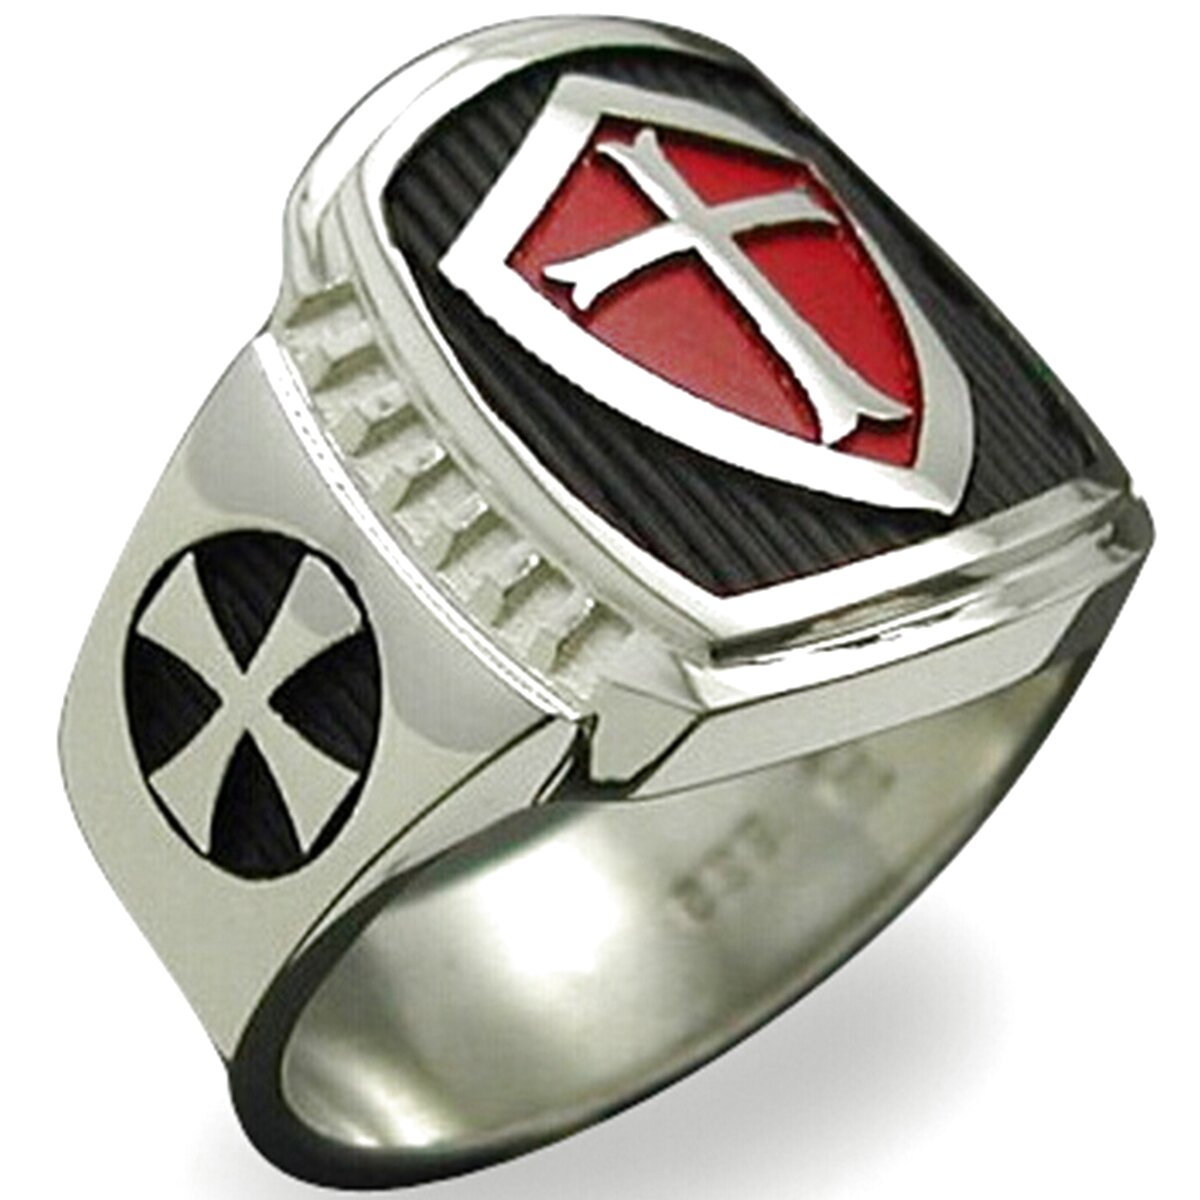 Knights Templar Ring for sale in UK | 62 used Knights Templar Rings